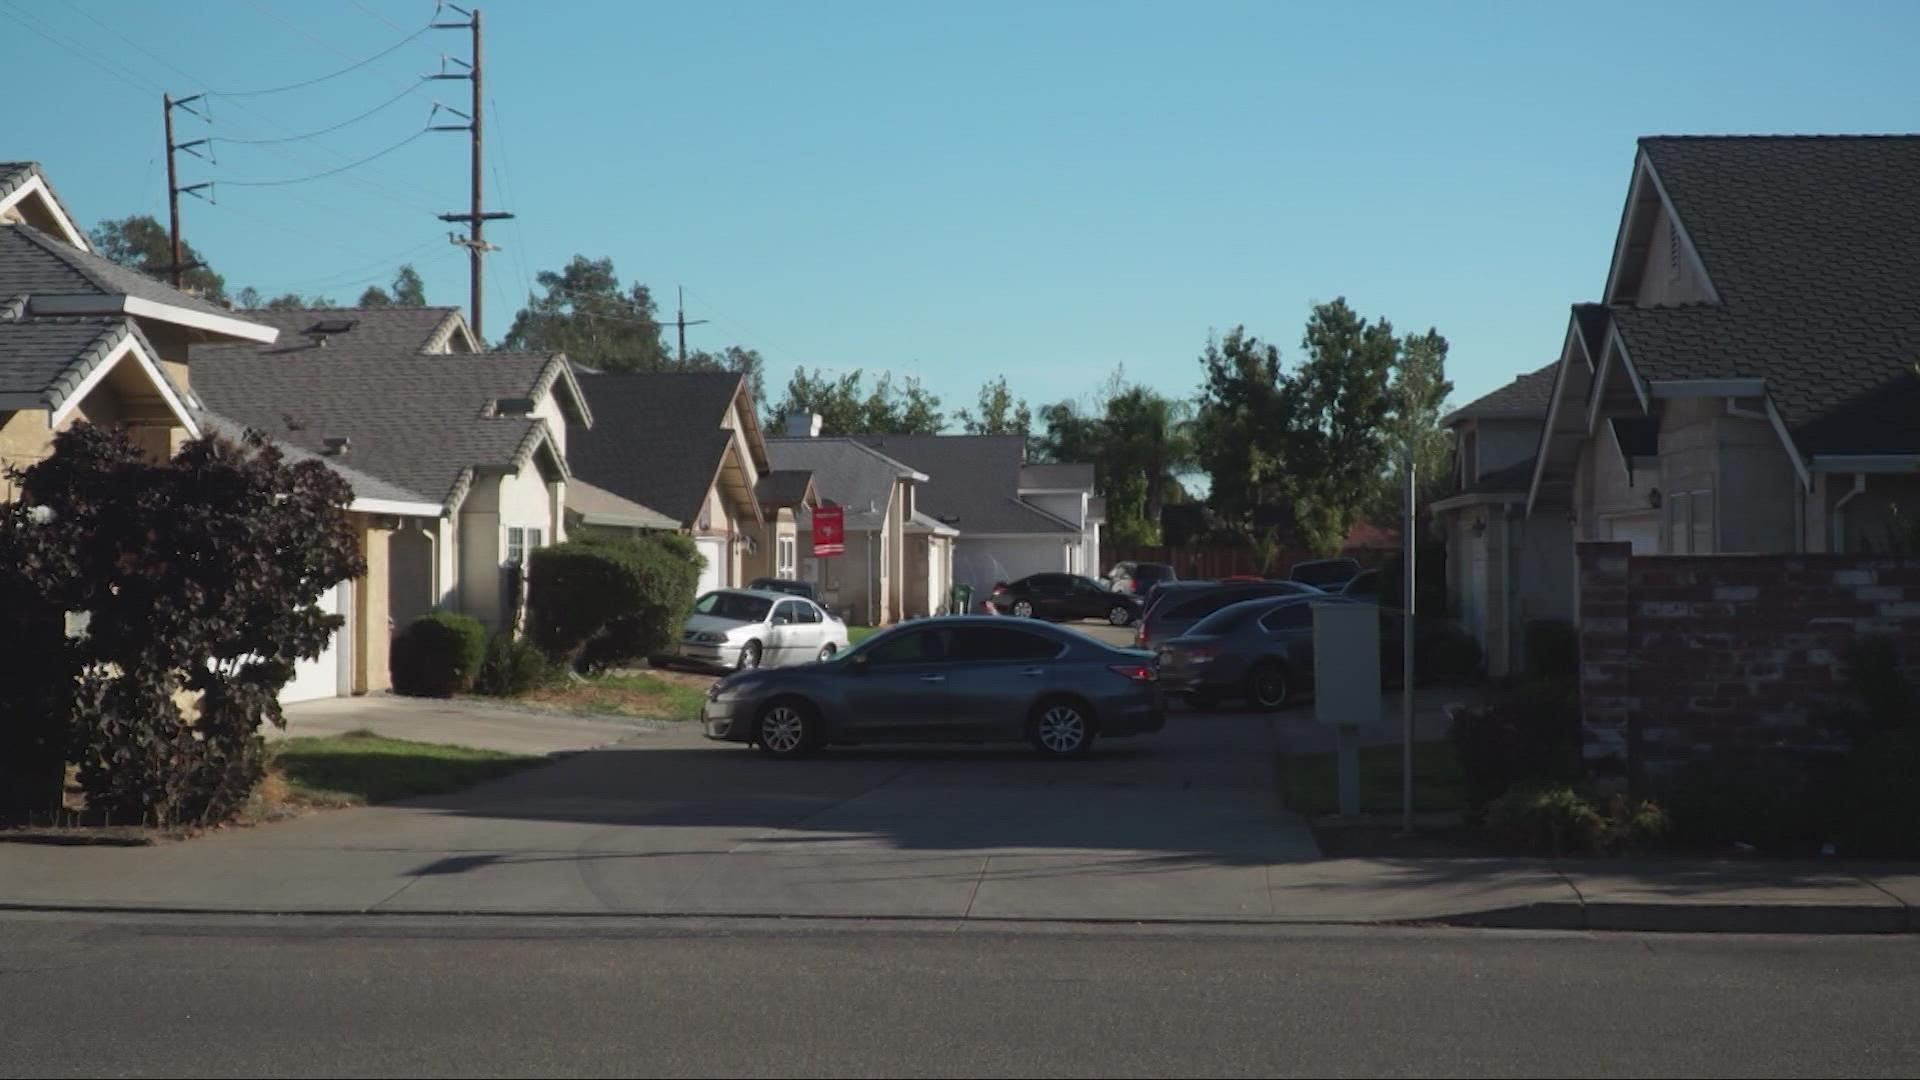 The deadly stabbing occurred near a quiet Lodi neighborhood, leaving nearby families feeling unsettled.